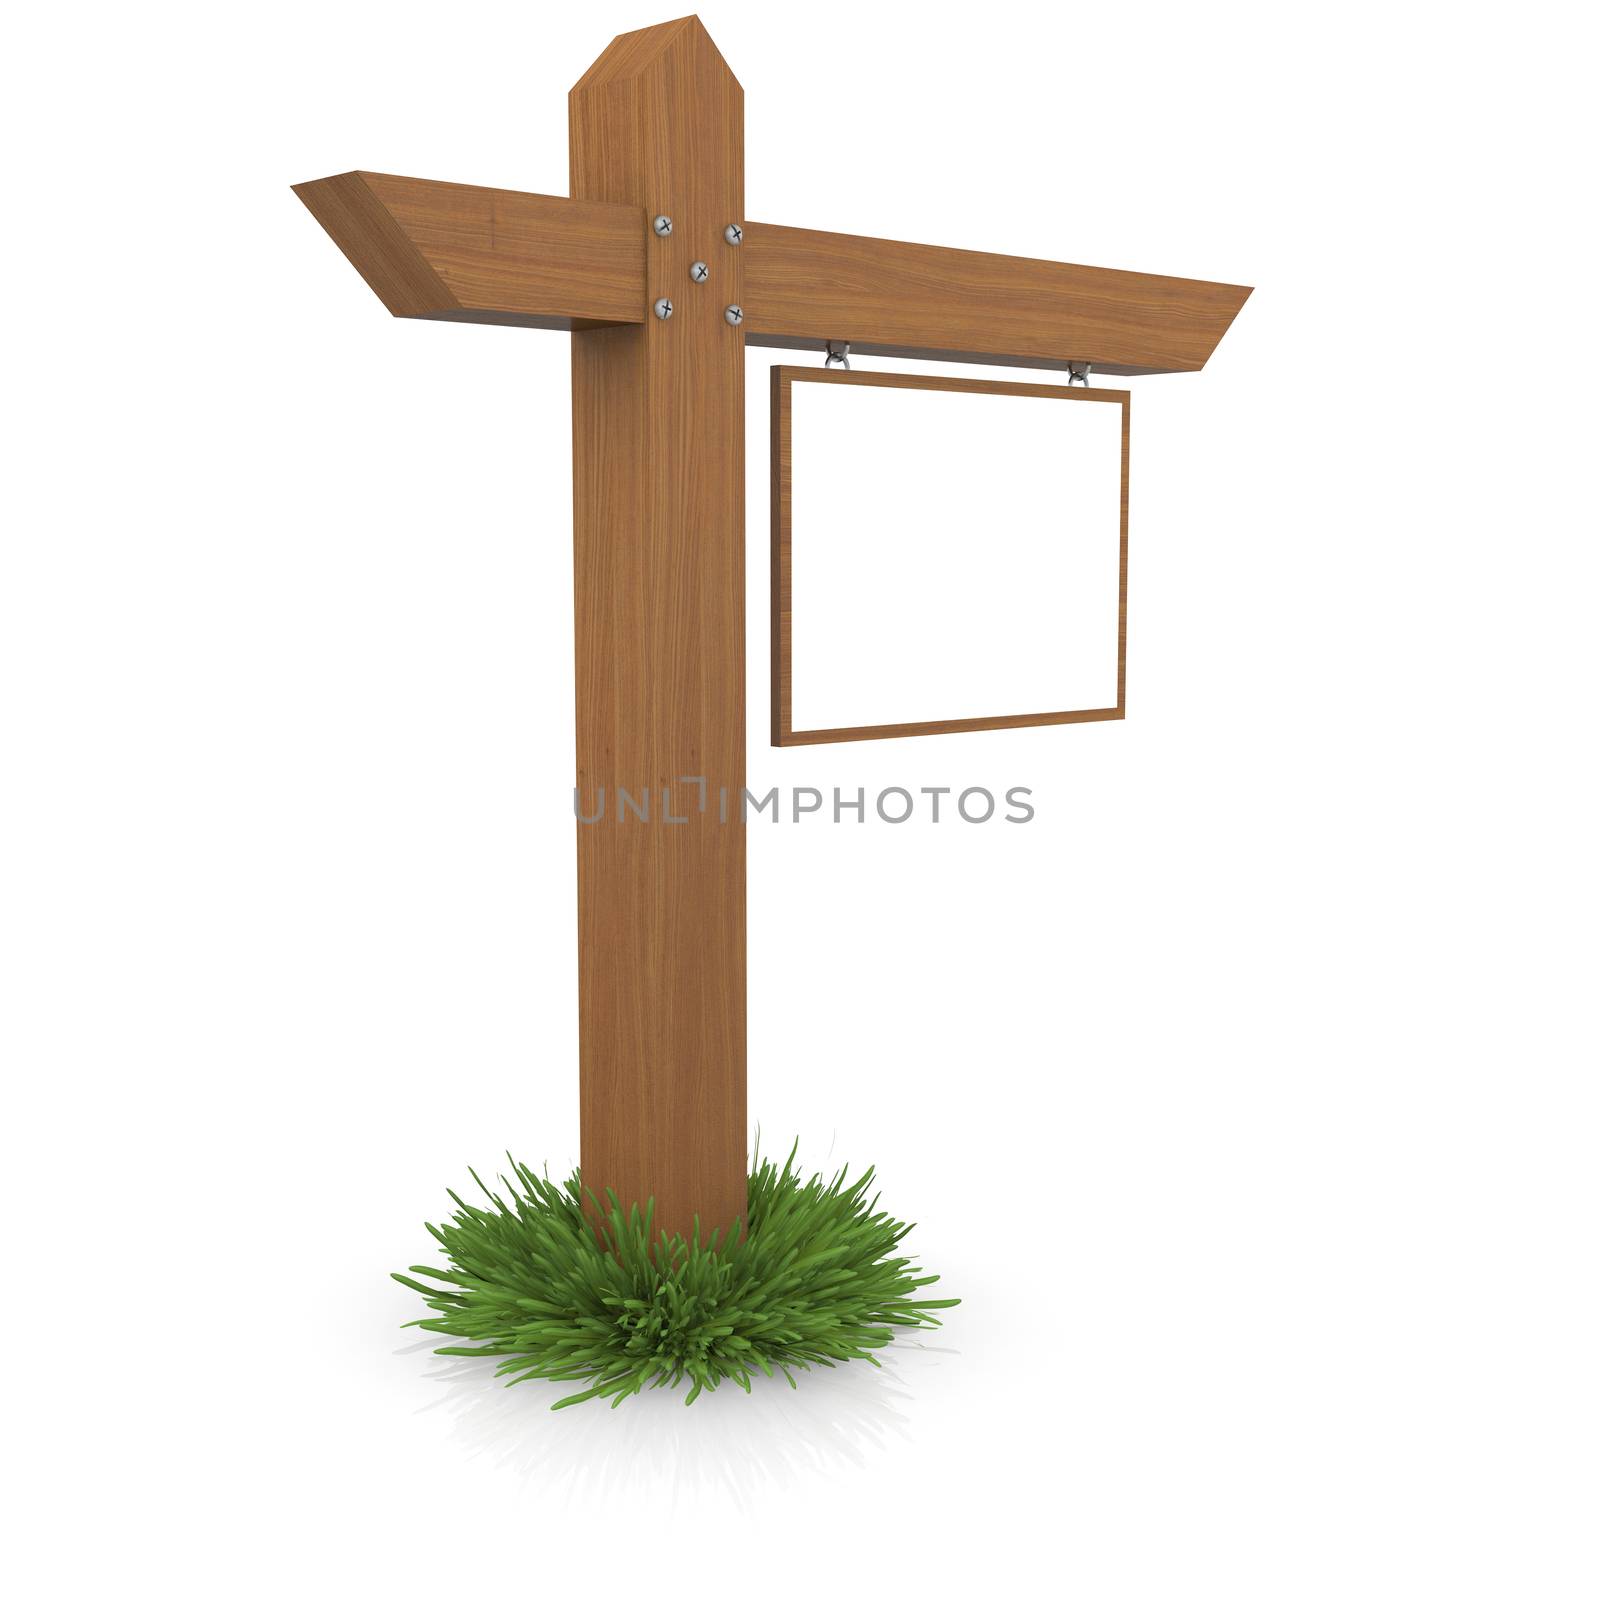 Wooden signboard in the grass. Isolated render on a white background